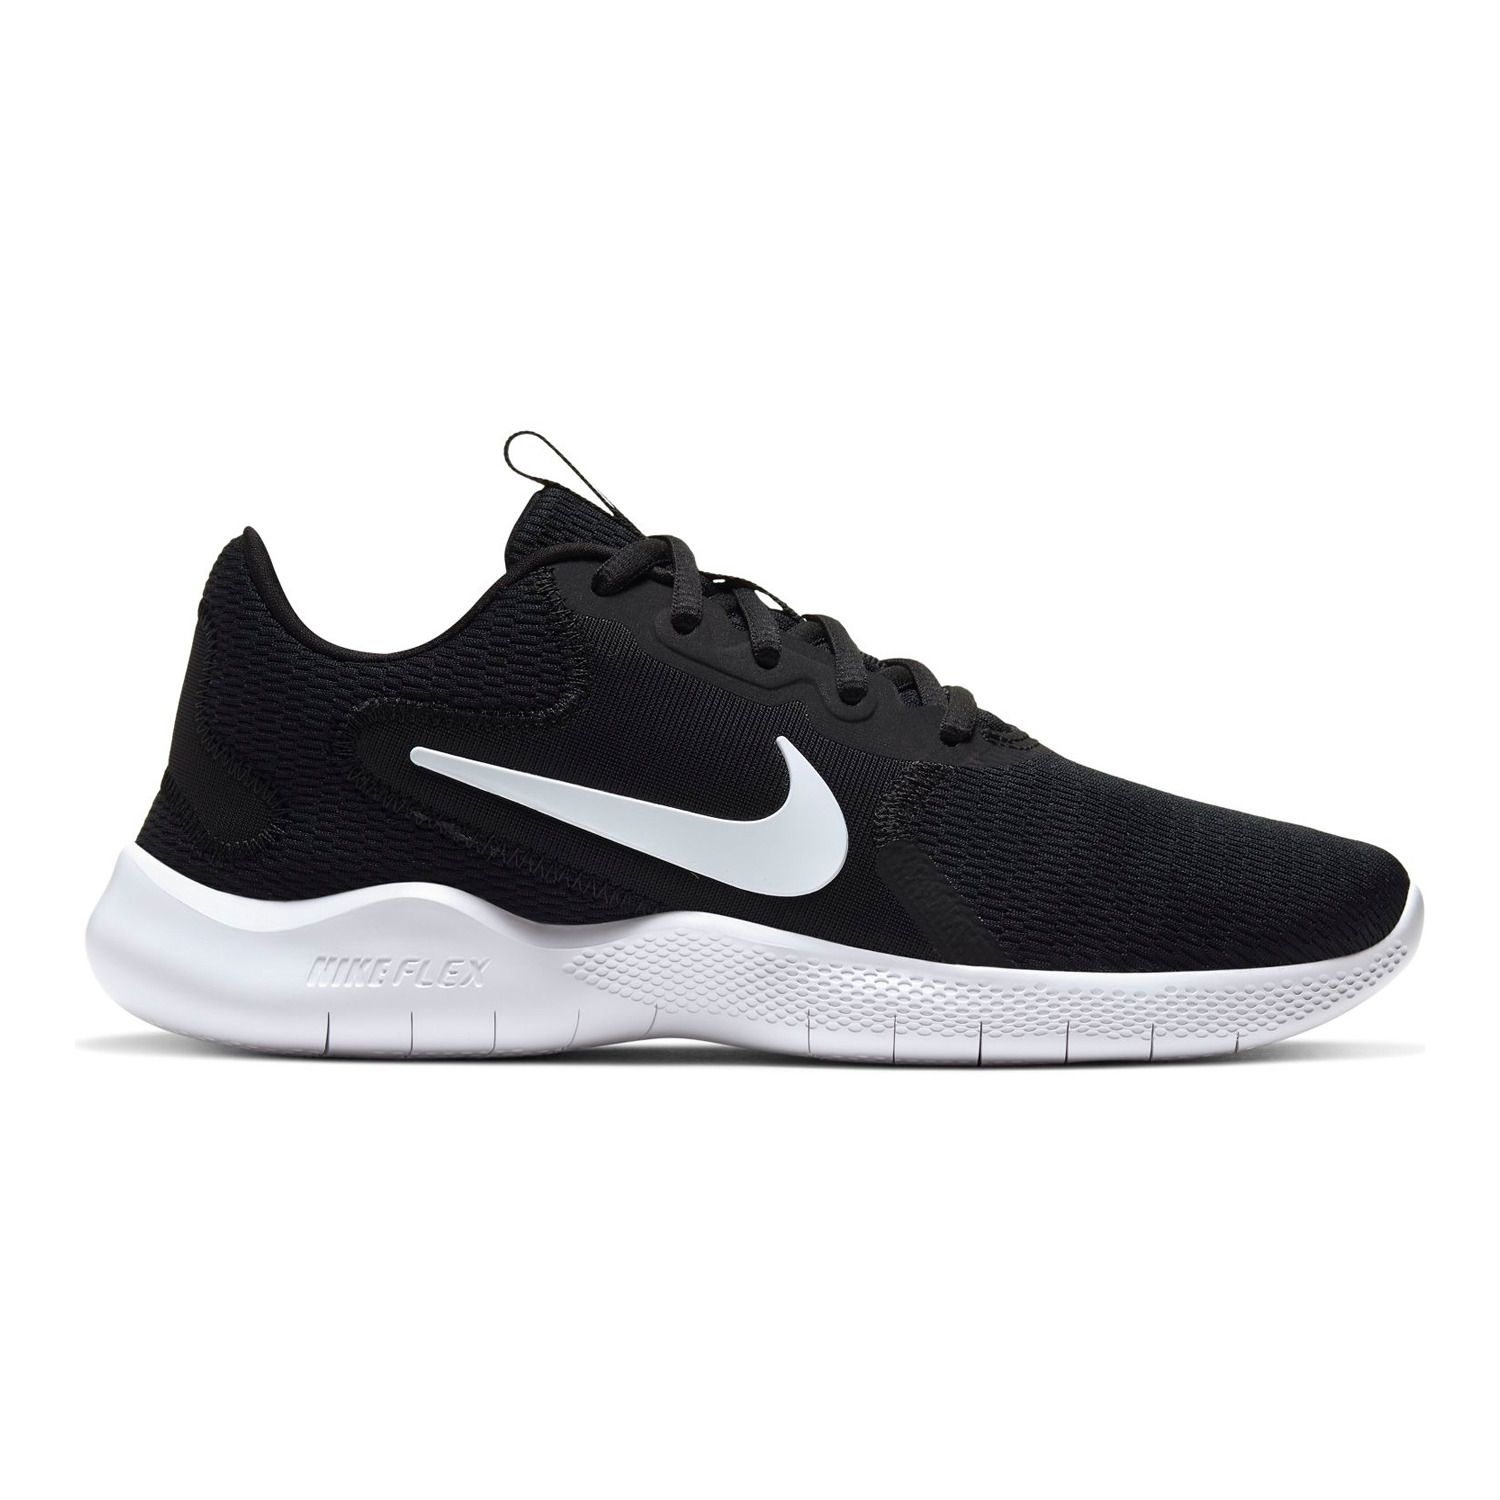 nike sports shoes for women